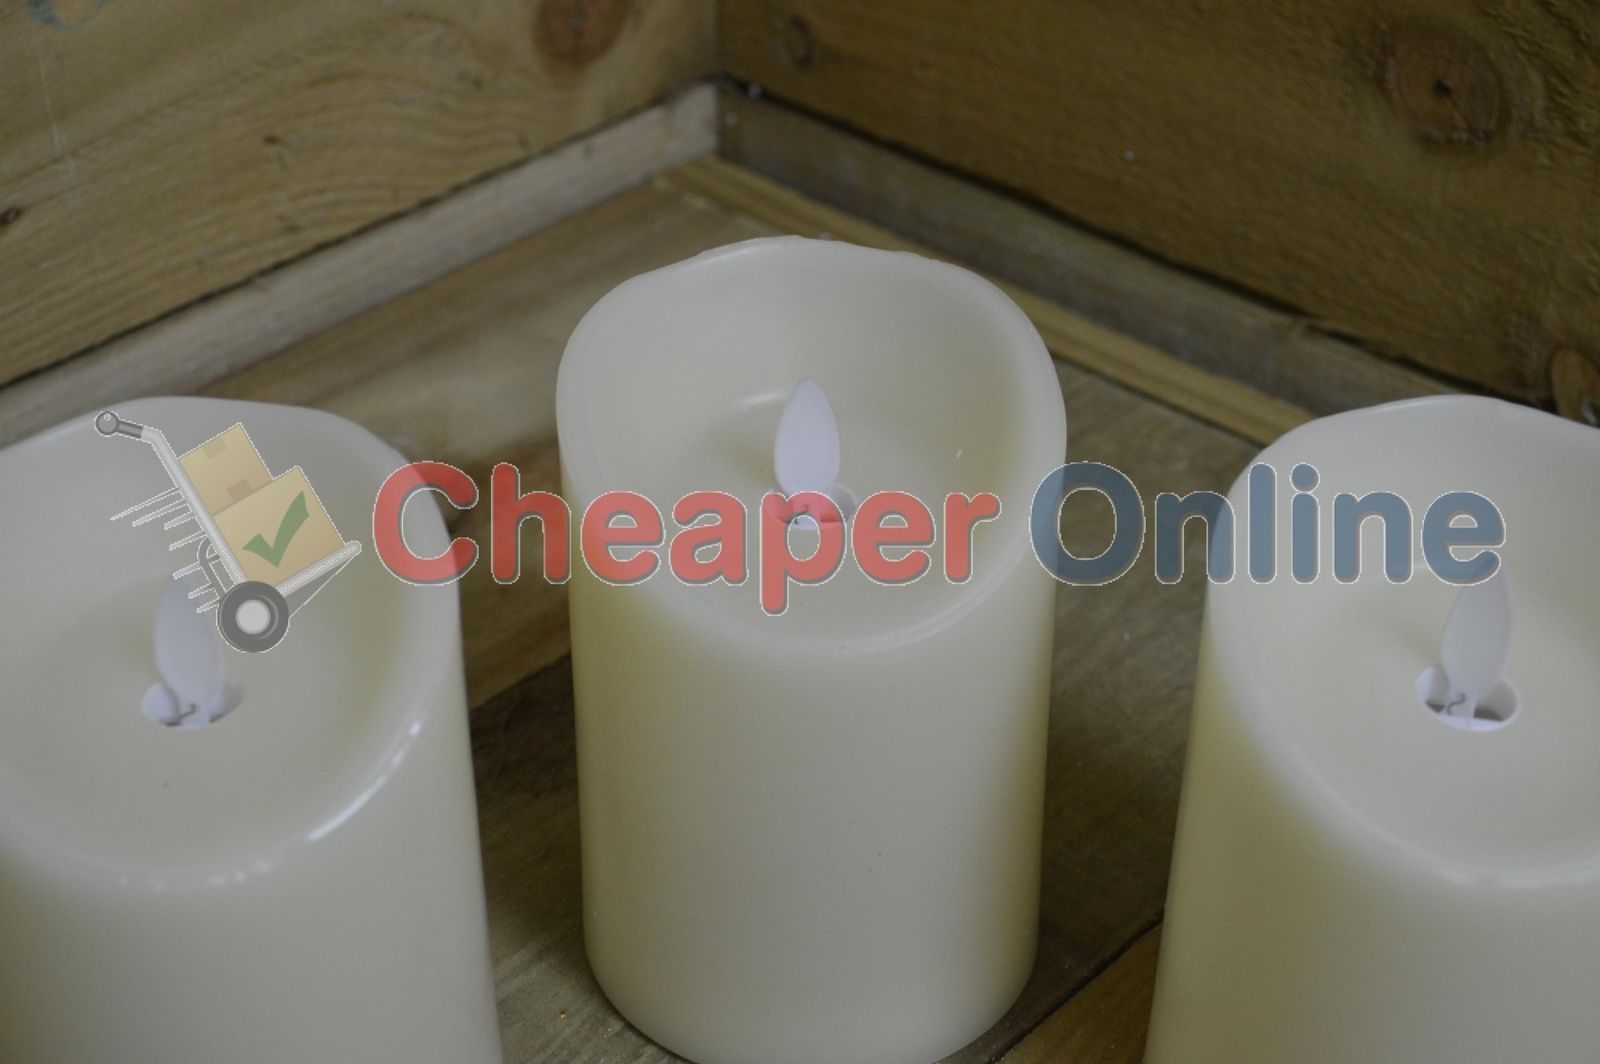 Set of 3 - 13cm x 9cm Battery Operated Dancing Flame Candle with Timer in Cream